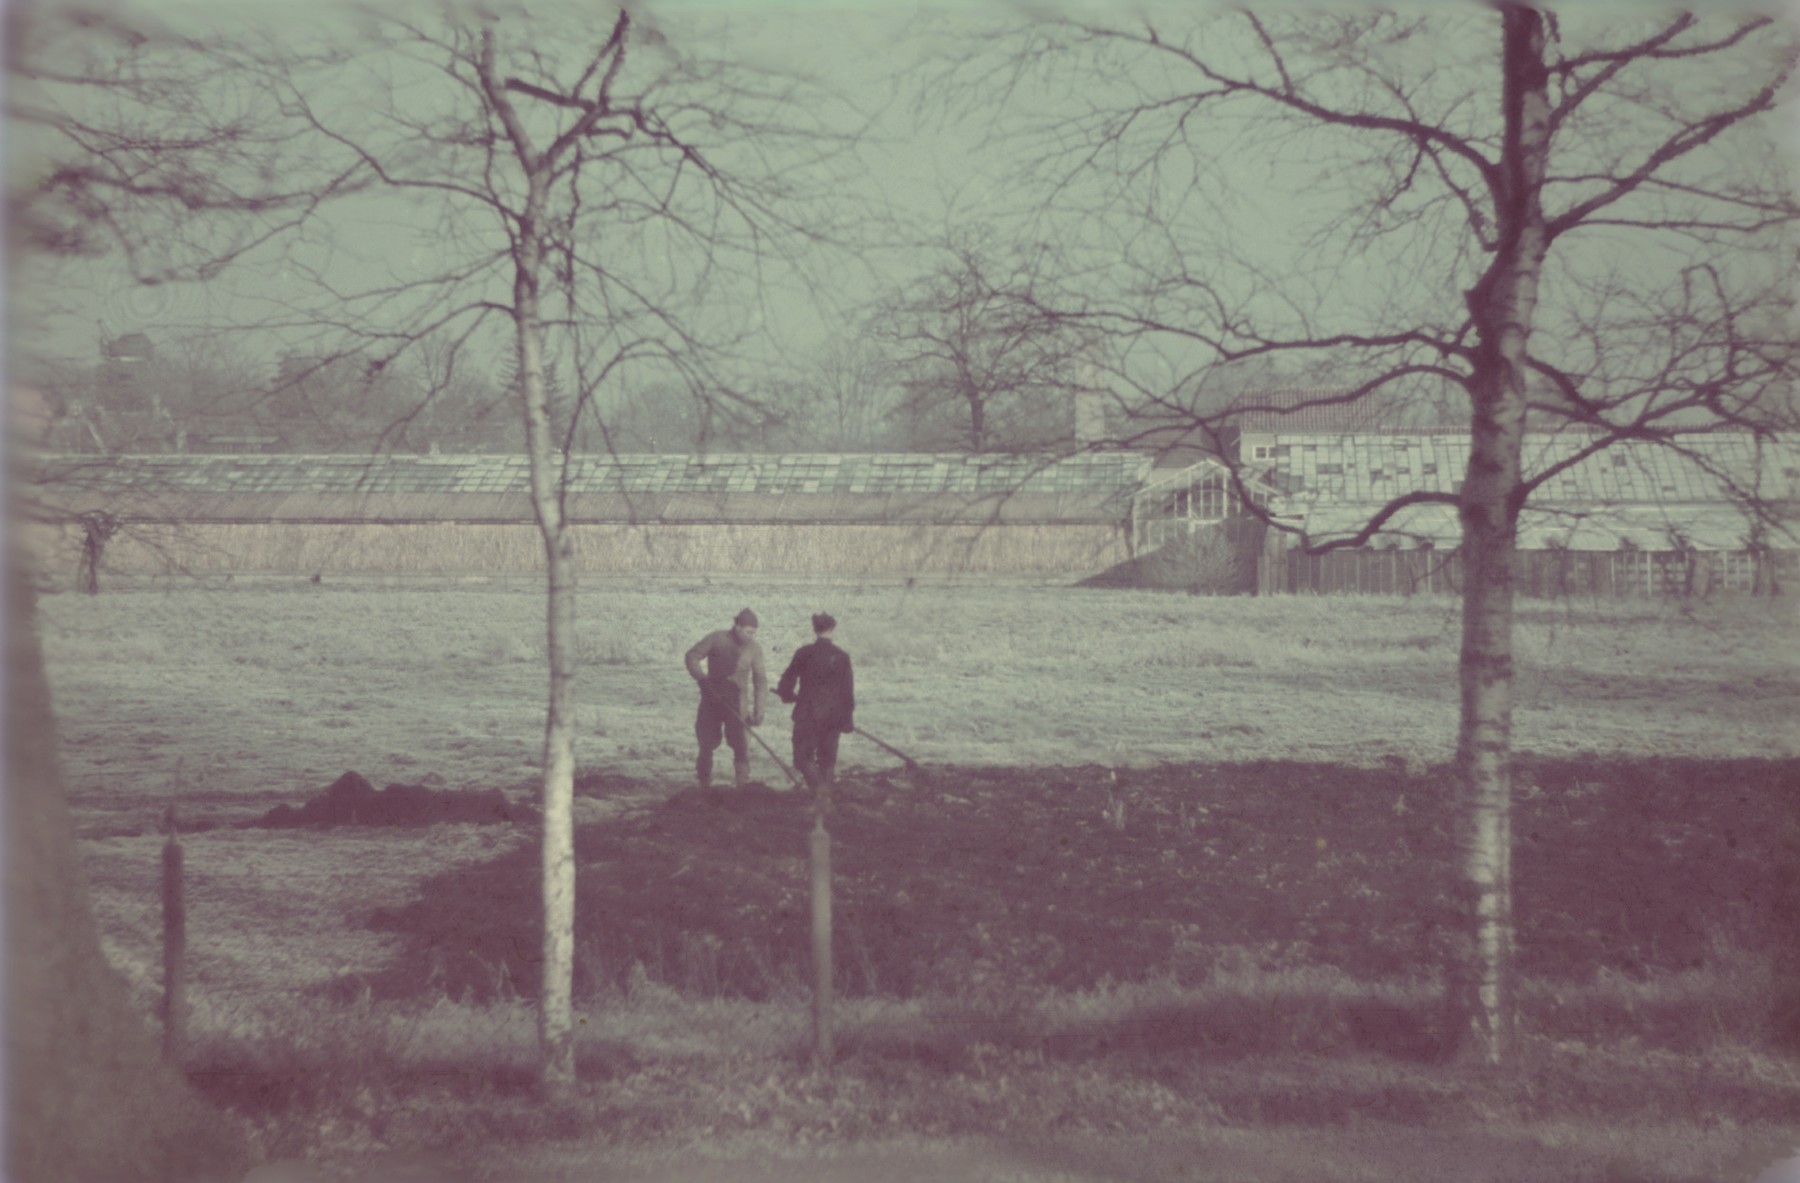 Fecalists dispose of sewage in an open field in the Lodz ghetto.